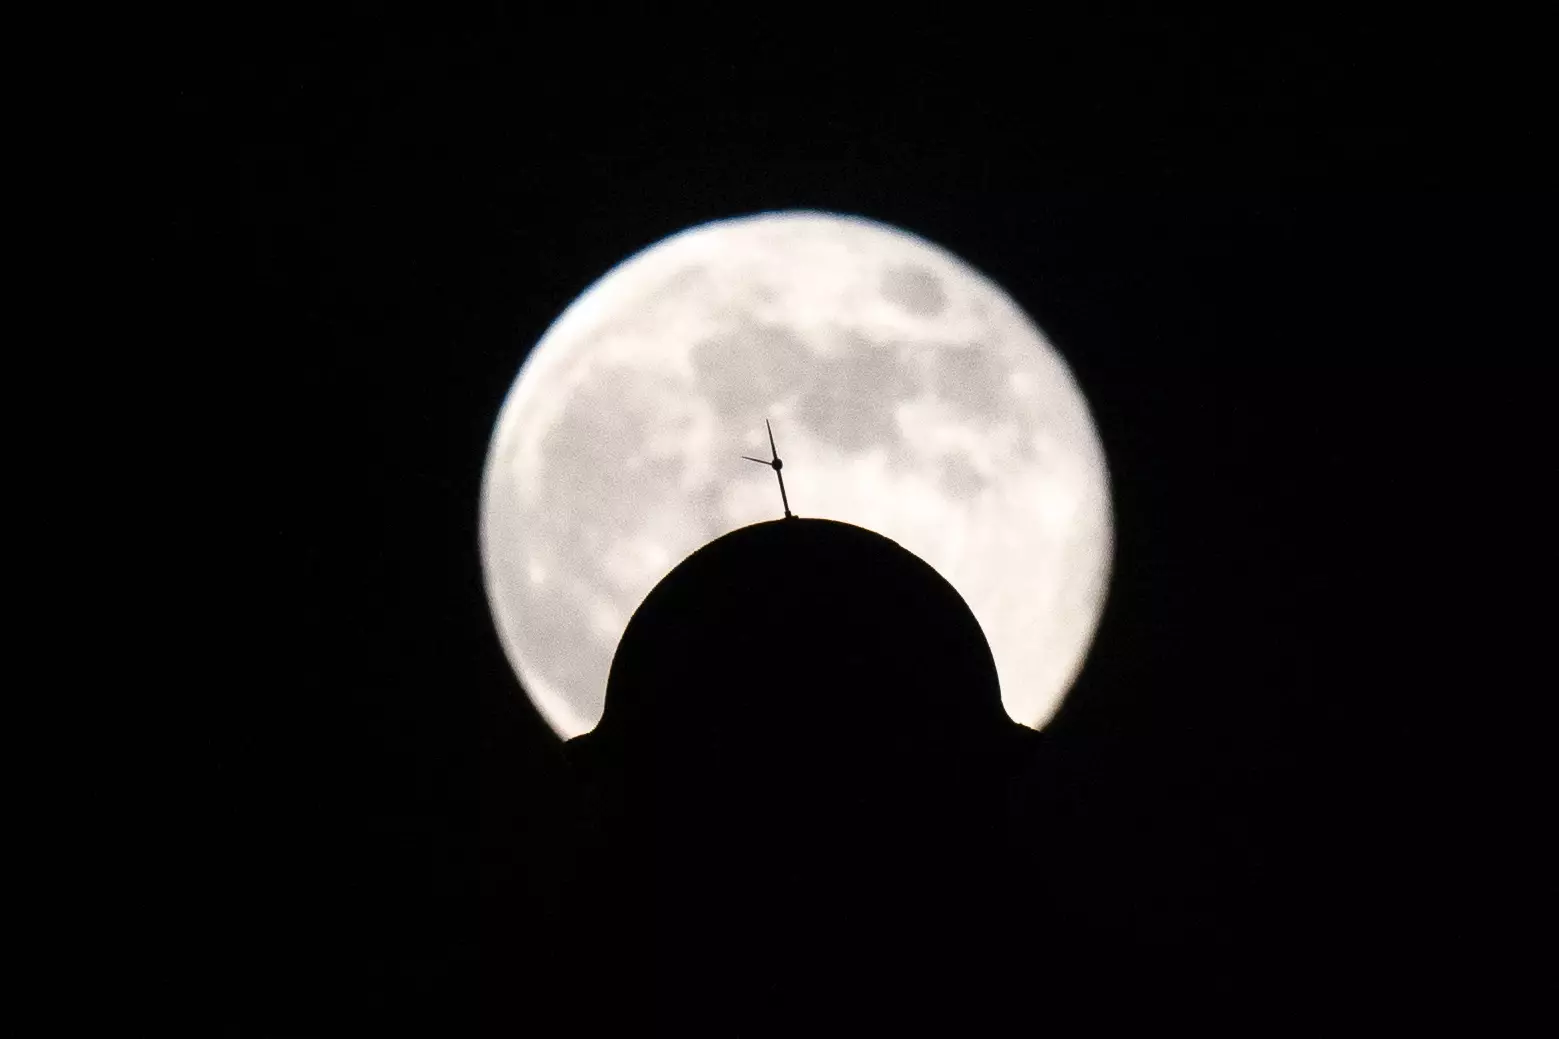 March's Worm Moon will be the first Supermoon of the year (